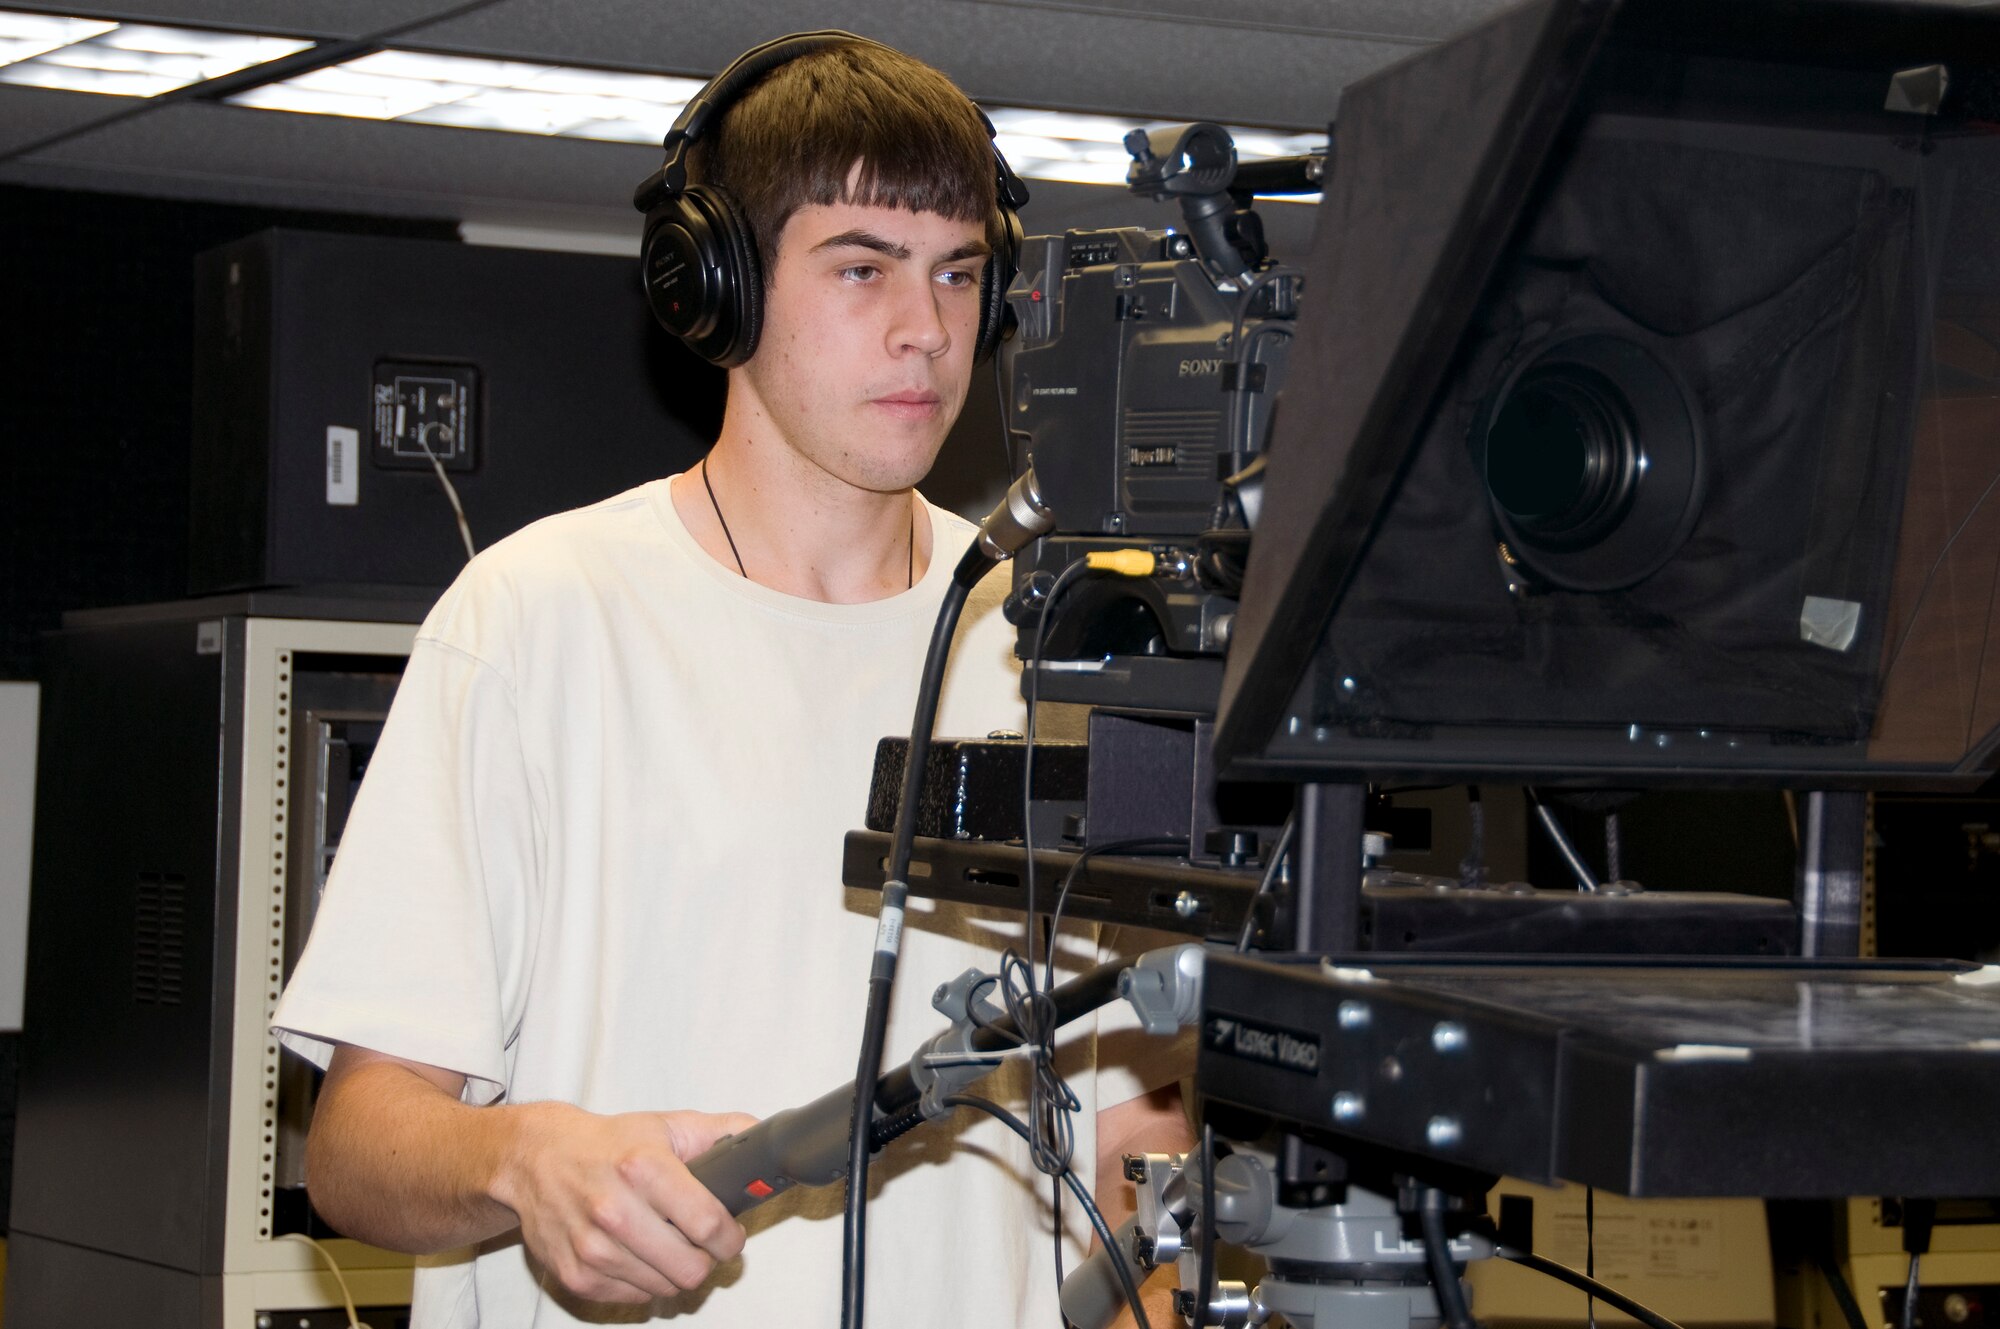 Ethan Halliday operates the camera during a filming session as part of his duties as a student intern with the Air Force Operational Test and Evaluation Center. The program partners AFOTEC with the University of New Mexico to recruit students and expose them to government service, particularly in shortage career fields.